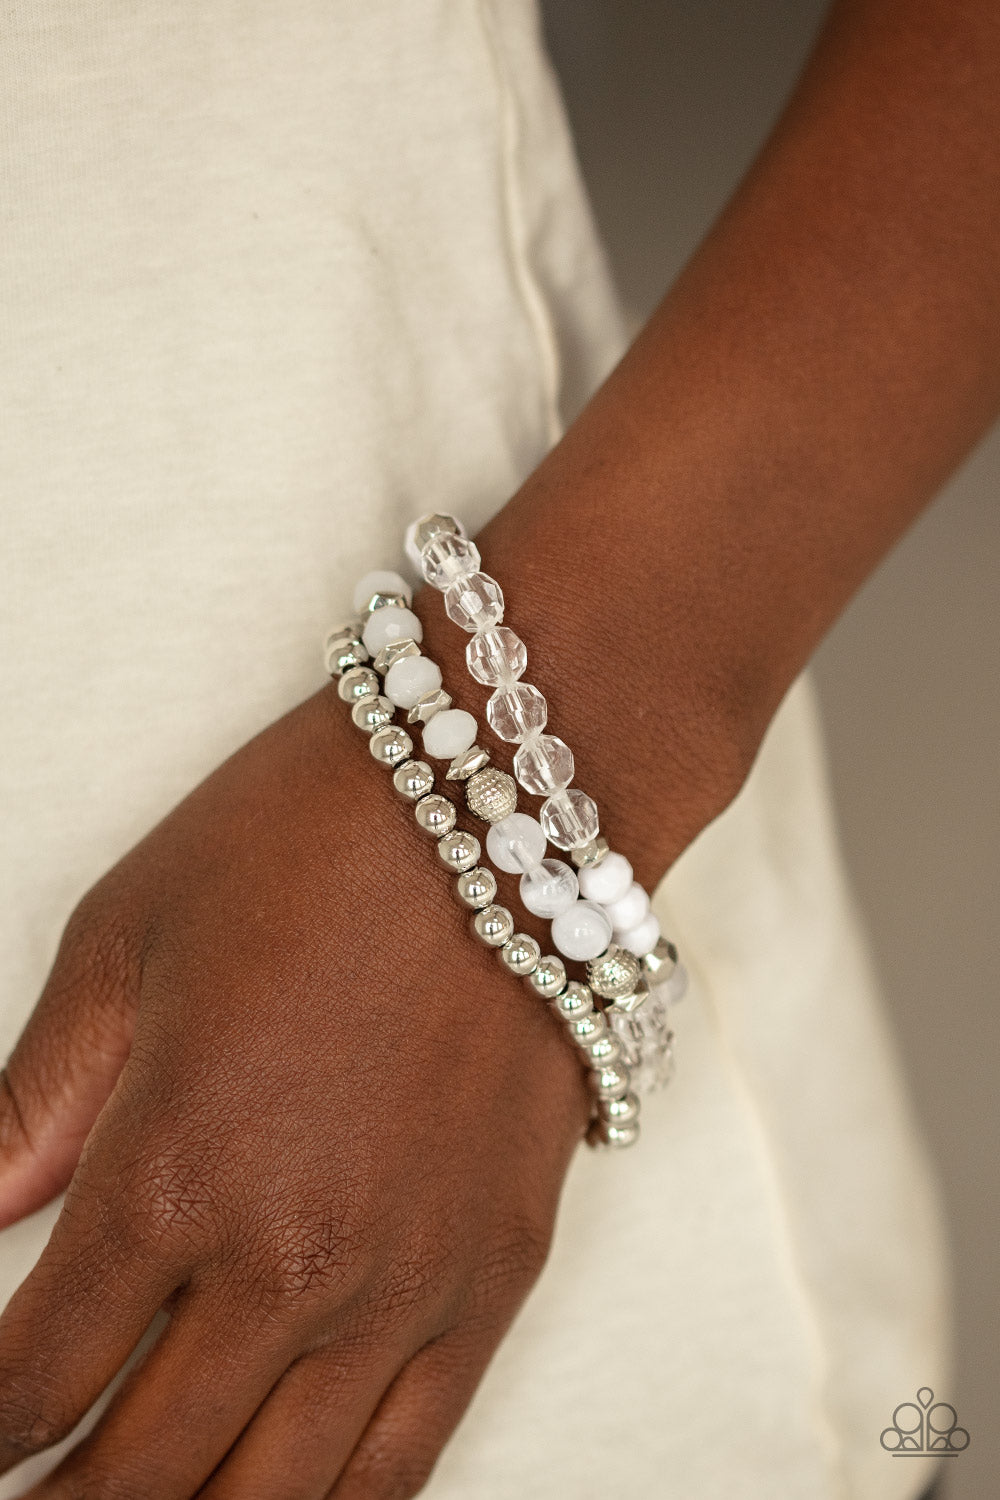 Paparazzi Jewelry Accessories - Sugary Shimmer - White Bracelet. Bling By Titia Boutique